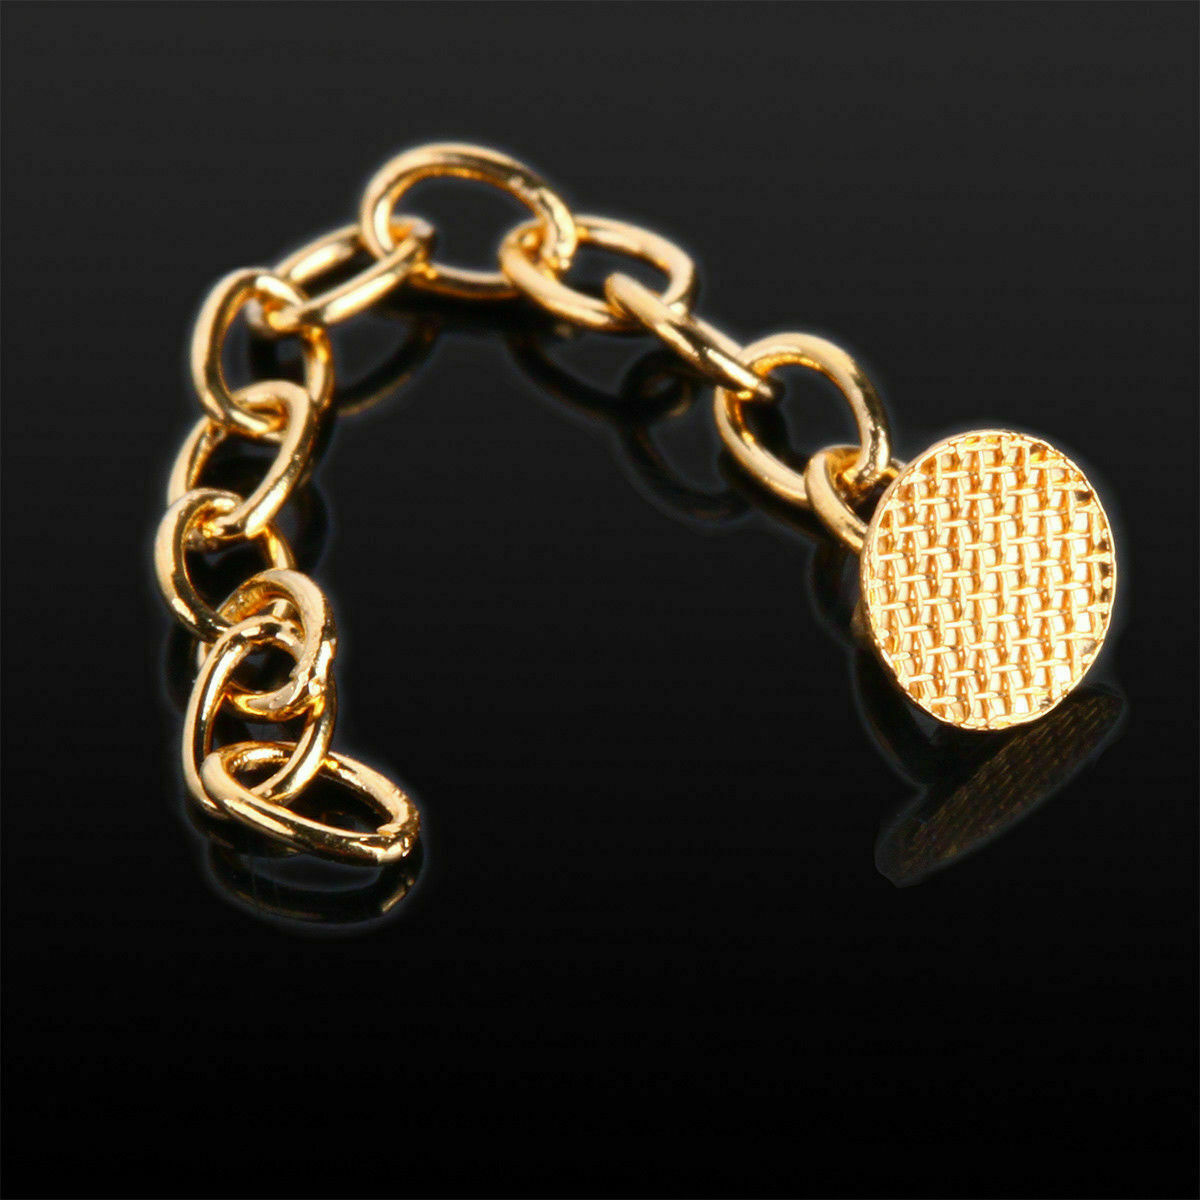 2 Pcs/pack Gold Dental Orthodontic Round Mesh Base Lingual Button Traction Chain